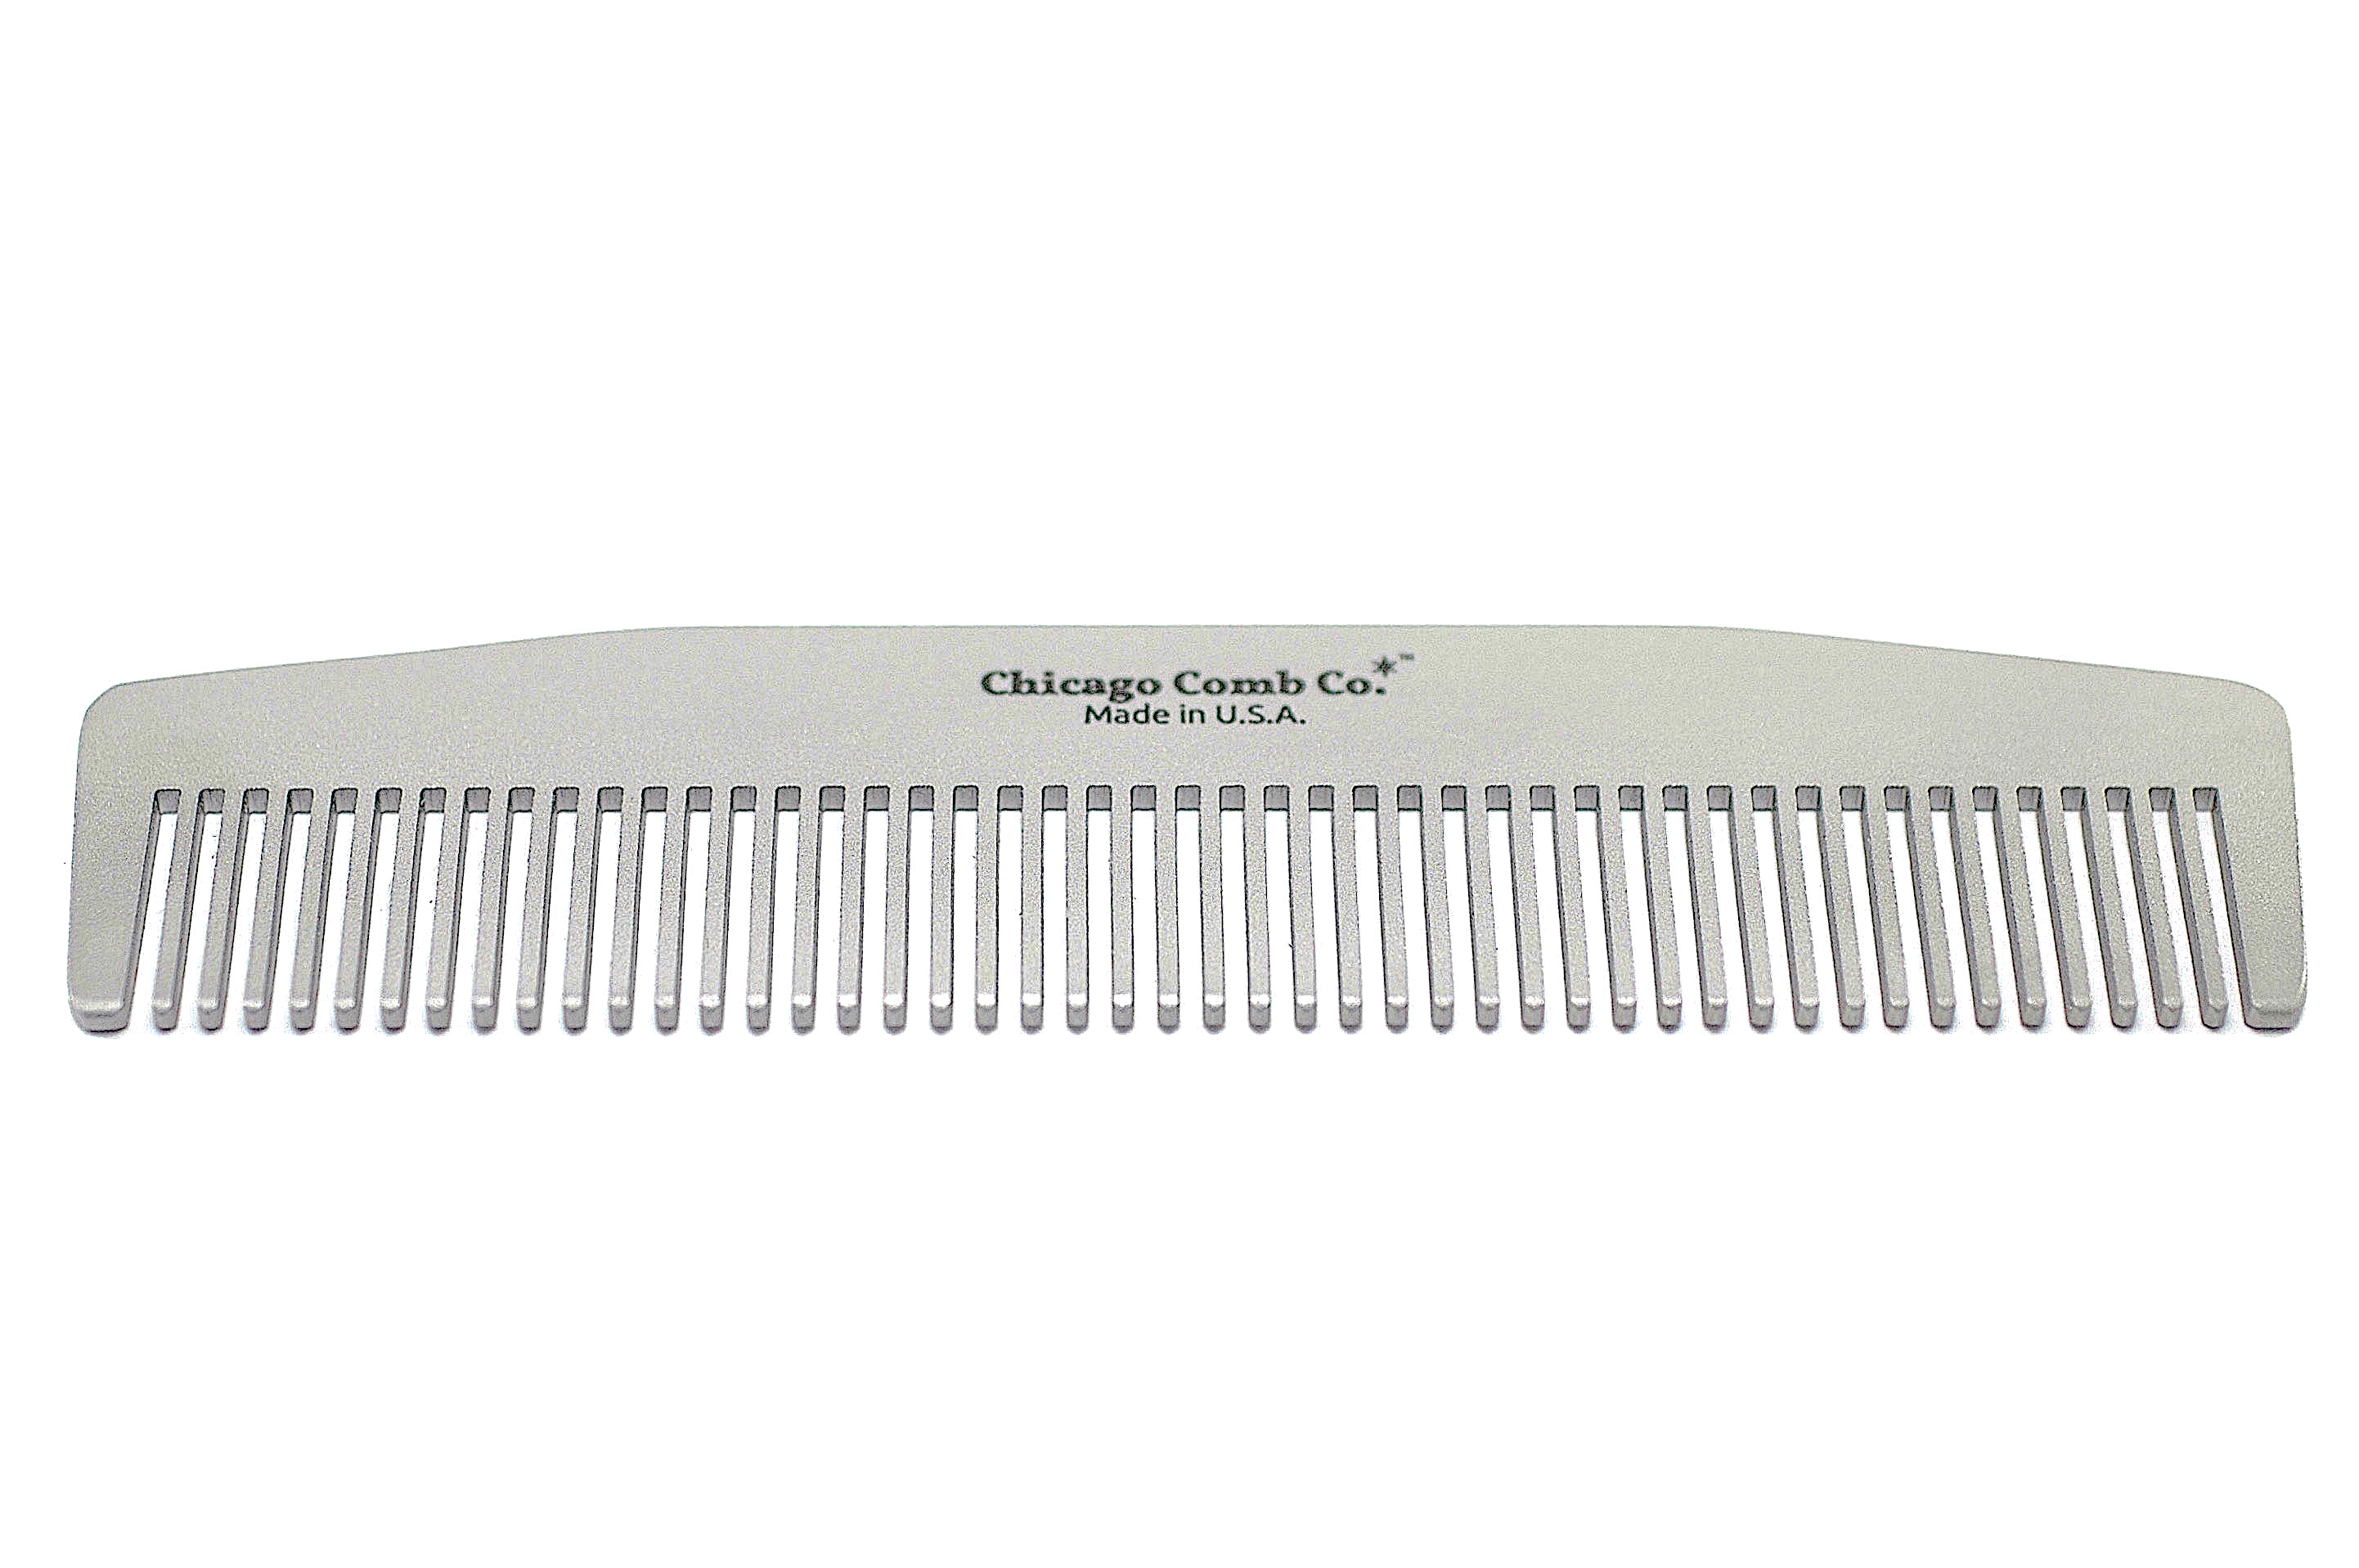 Chicago Comb Co. Model No. 3 Standard Stainless Steel - Sprezstyle - Men's  Grooming